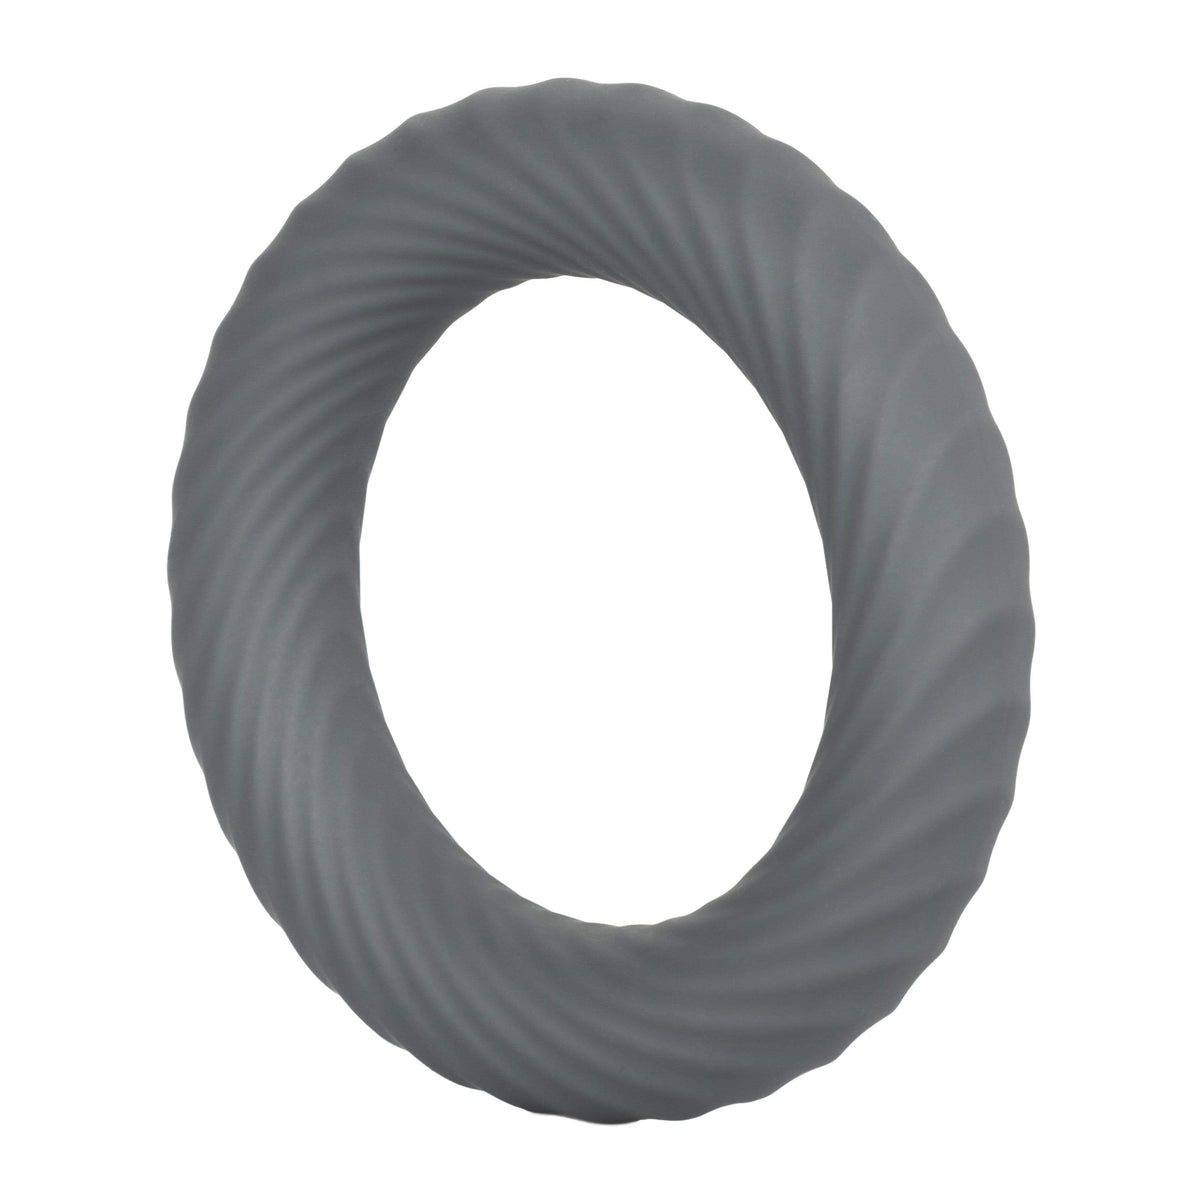 California Exotics - Link Up Edge Vibrating Cock Ring (Grey)    Silicone Cock Ring (Vibration) Rechargeable